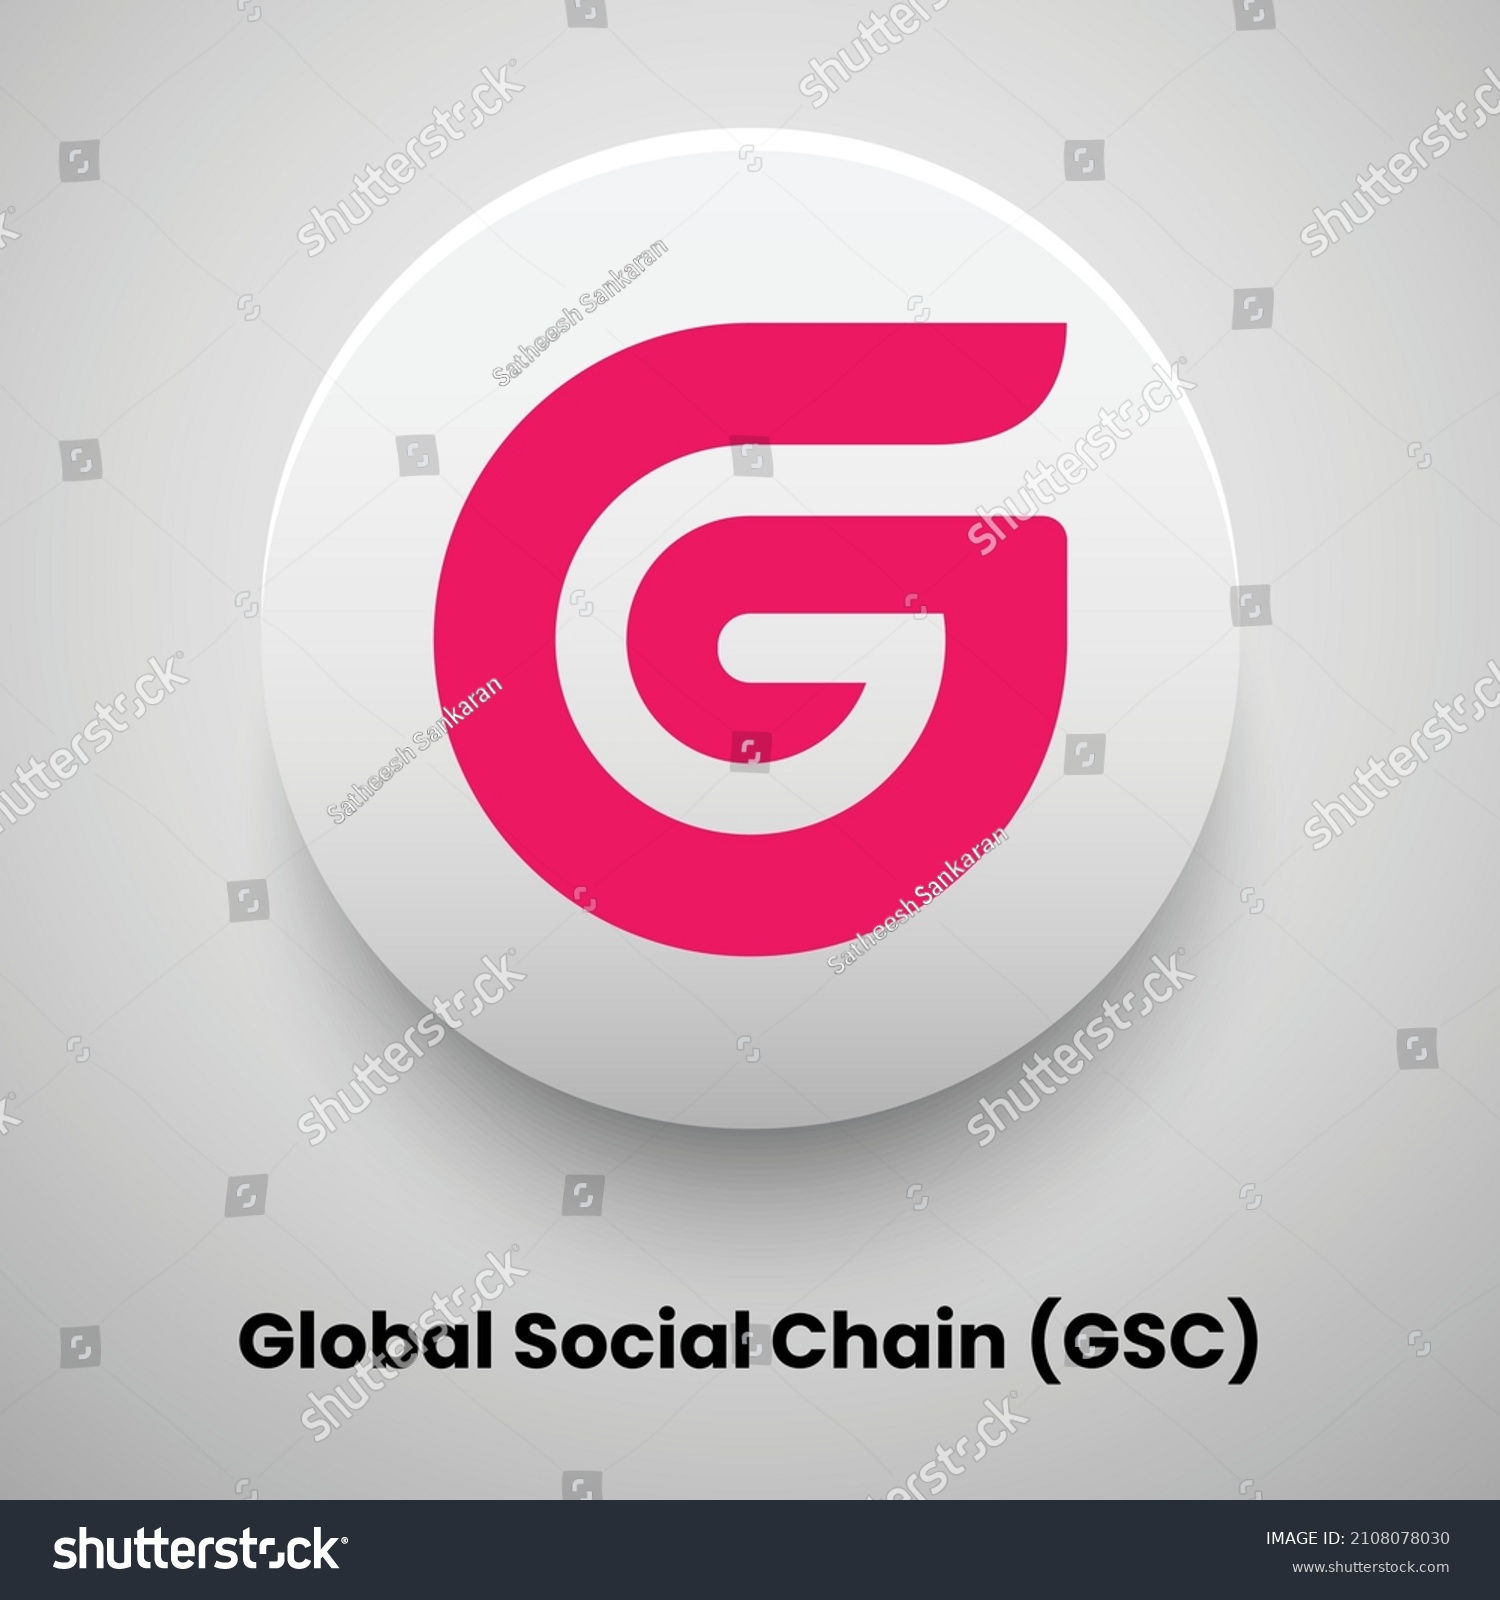 SVG of Creative block chain based crypto currency Global Social Chain (GSC) logo vector illustration design. Can be used as currency icon, badge, label, symbol, sticker and print background template svg